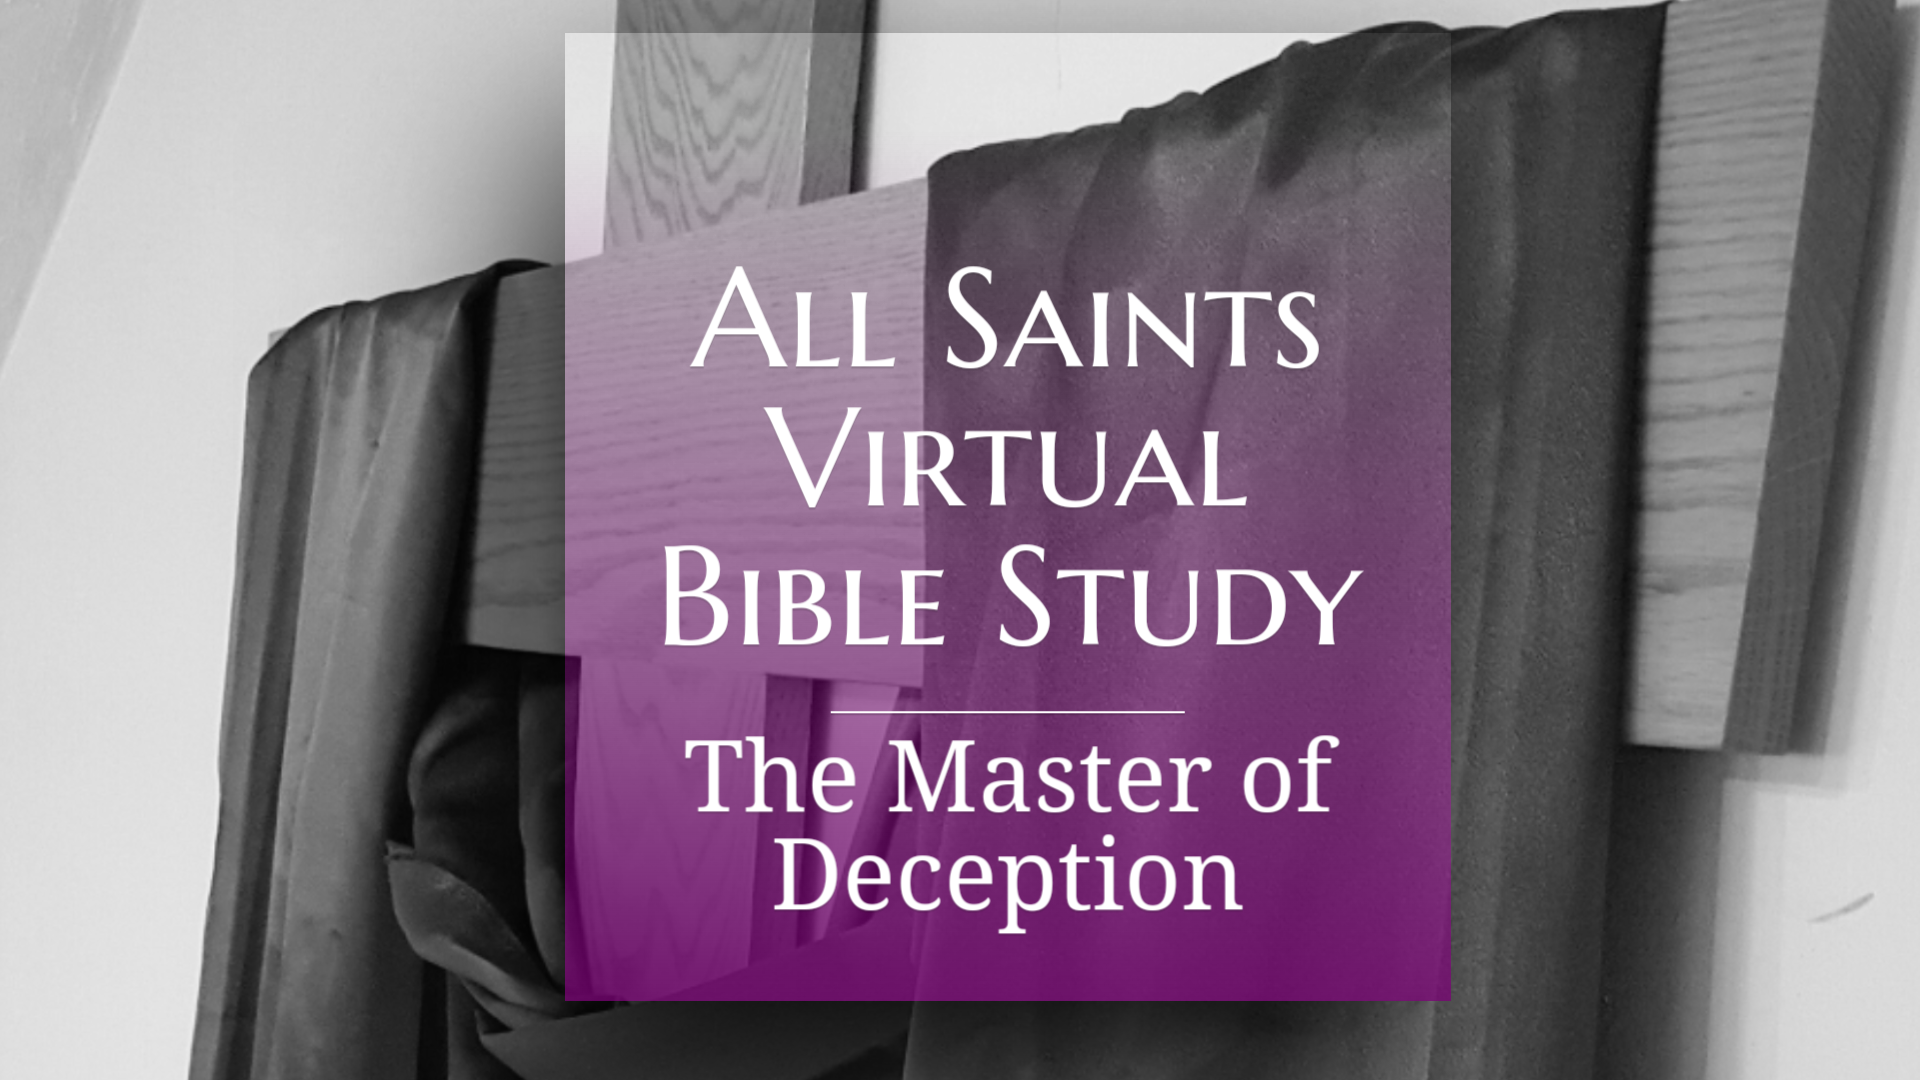 All Saints Virtual Bible Study - The Master of Deception